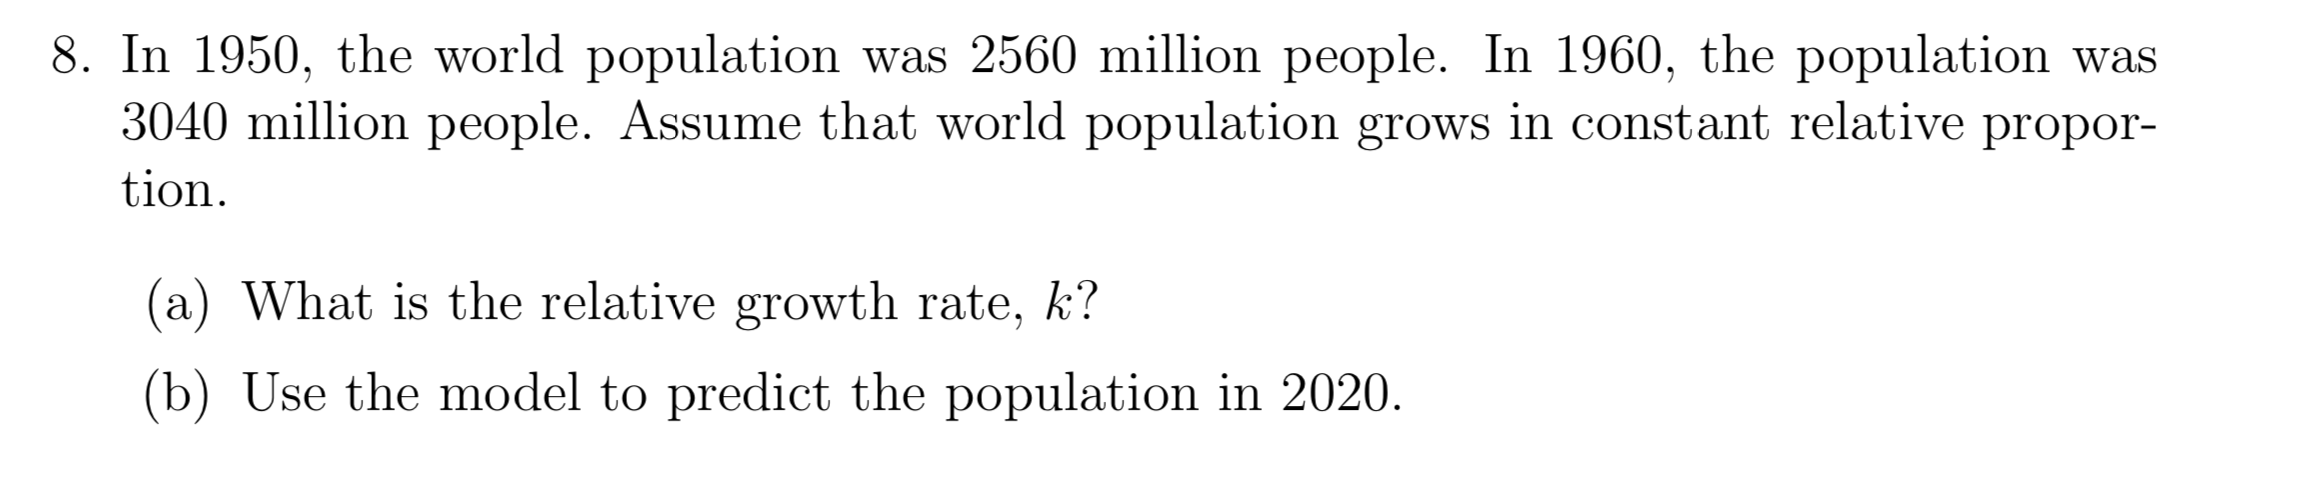 8. In 1950, the world population was 2560 million people. In 1960, the population was
3040 million people. Assume that world population grows in constant relative propor-
tion
(a) What is the relative growth rate, k?
(b) Use the model to predict the population in 2020.
